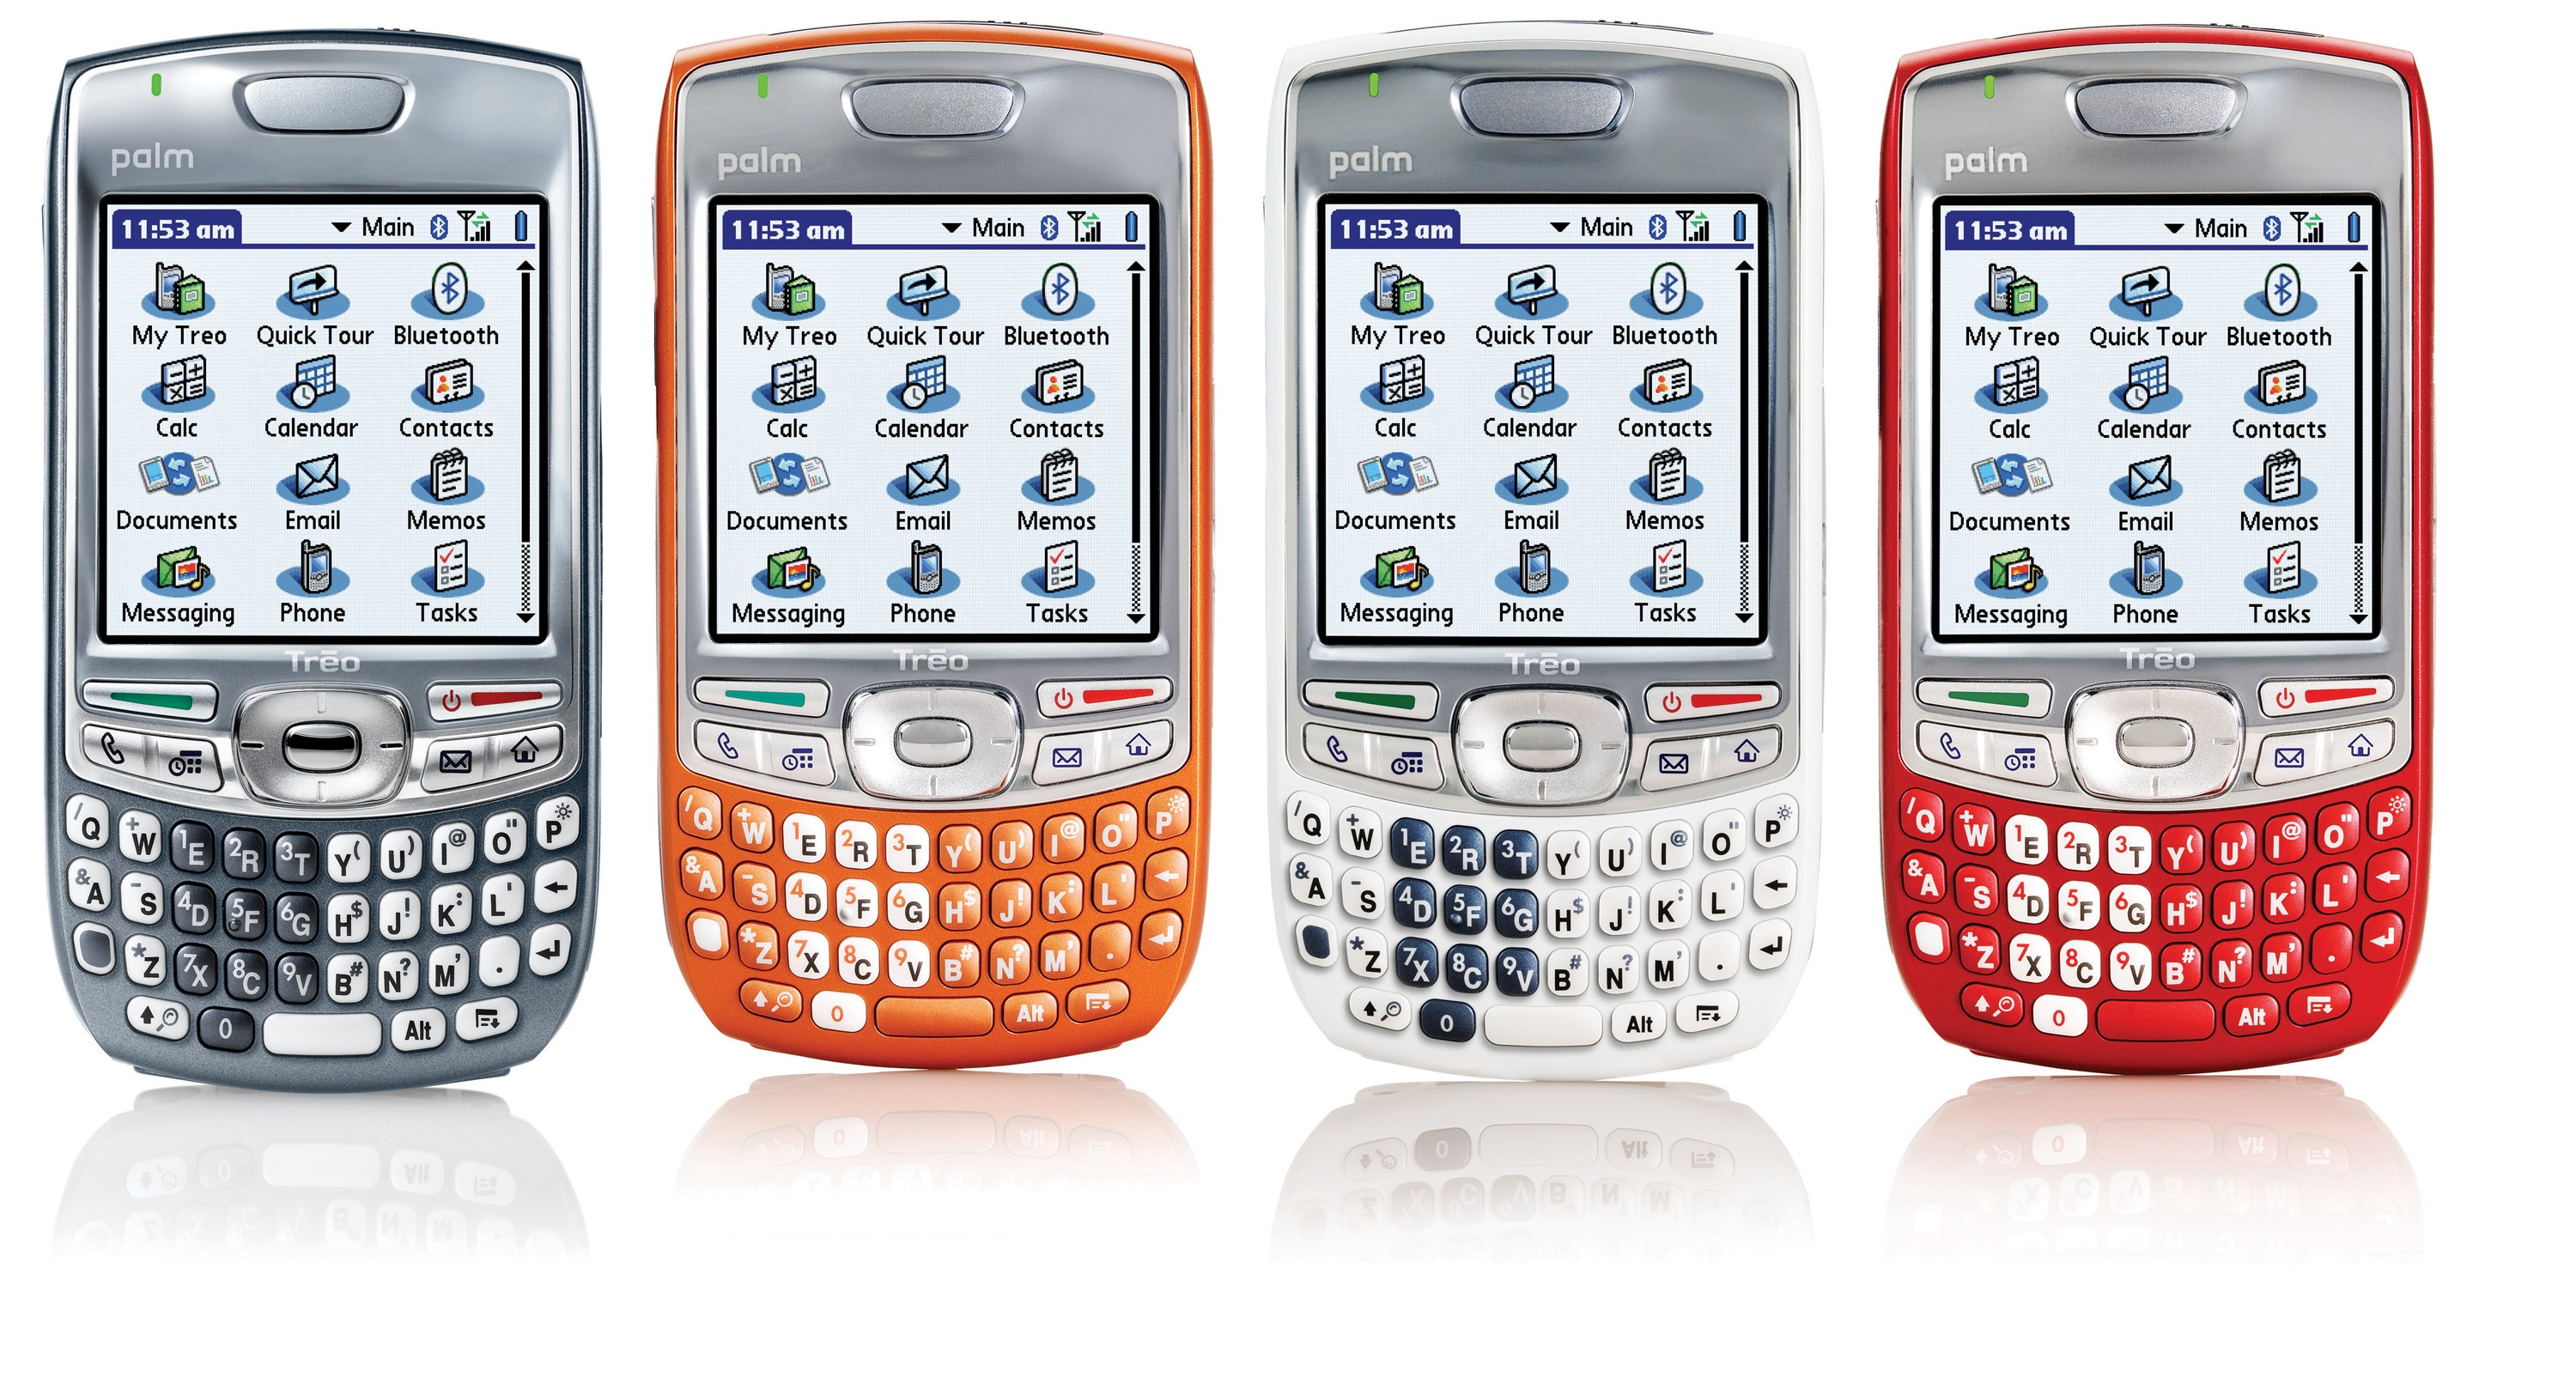 2715_large_Treo 680 group shot (4 devices)_highres